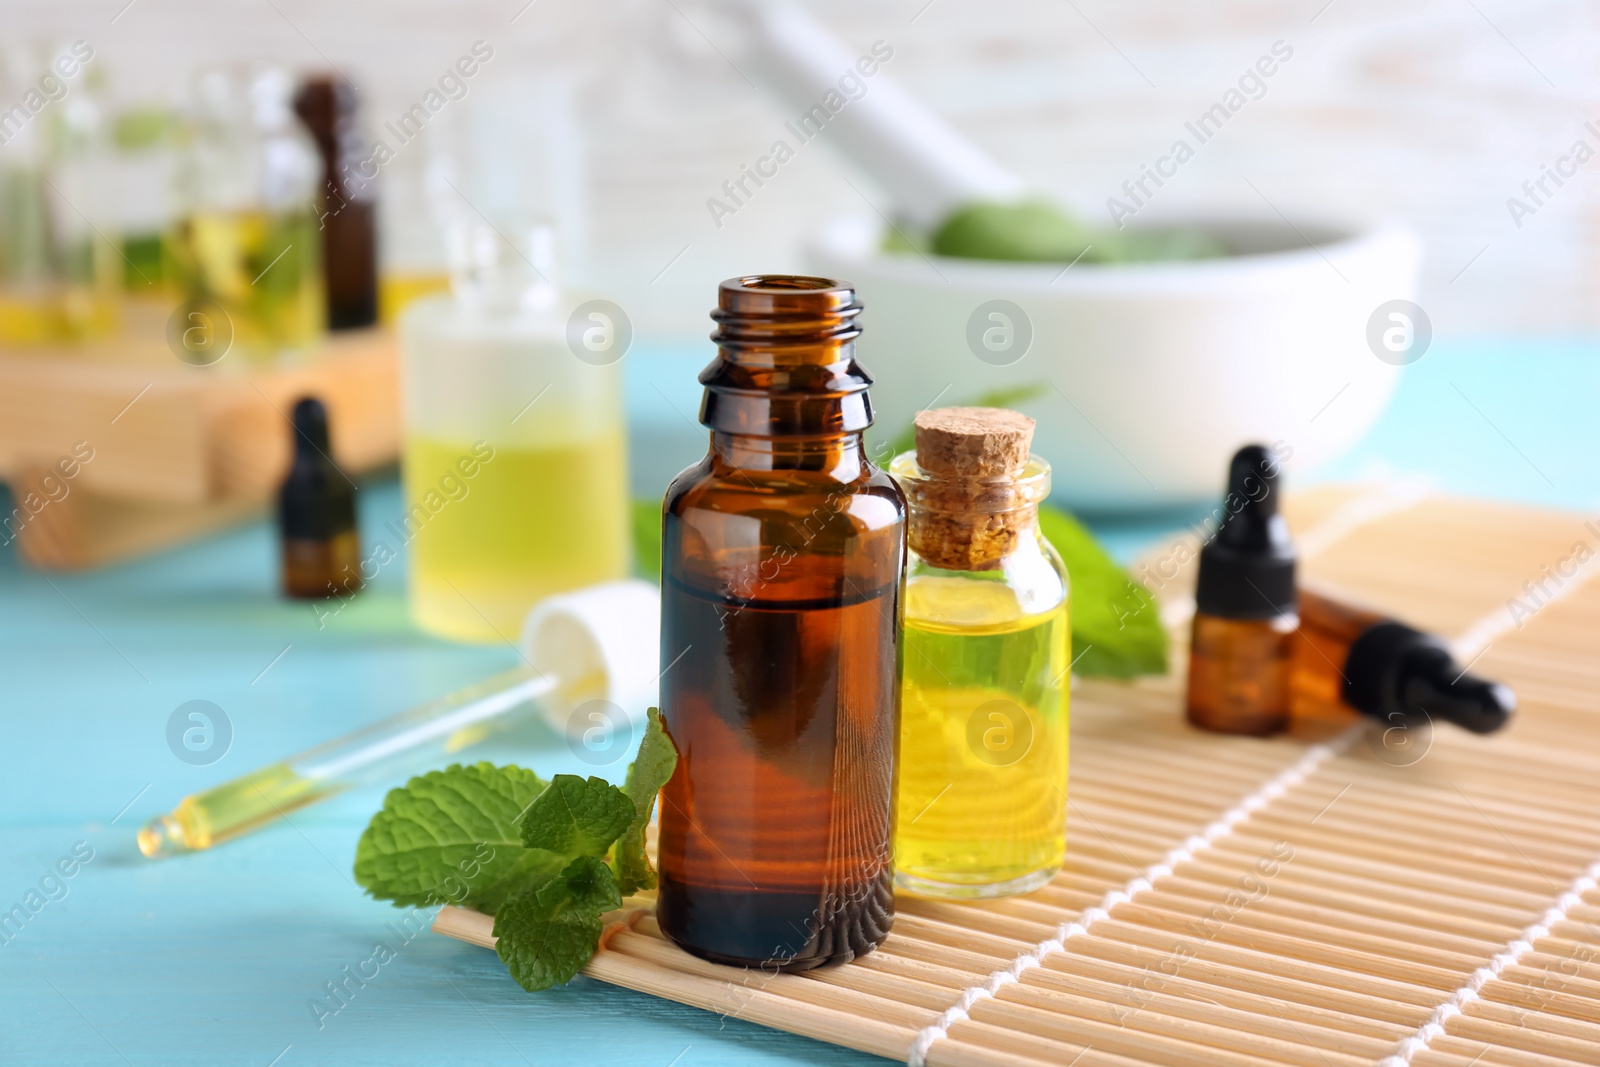 Photo of Bottles with essential oils on bamboo mat